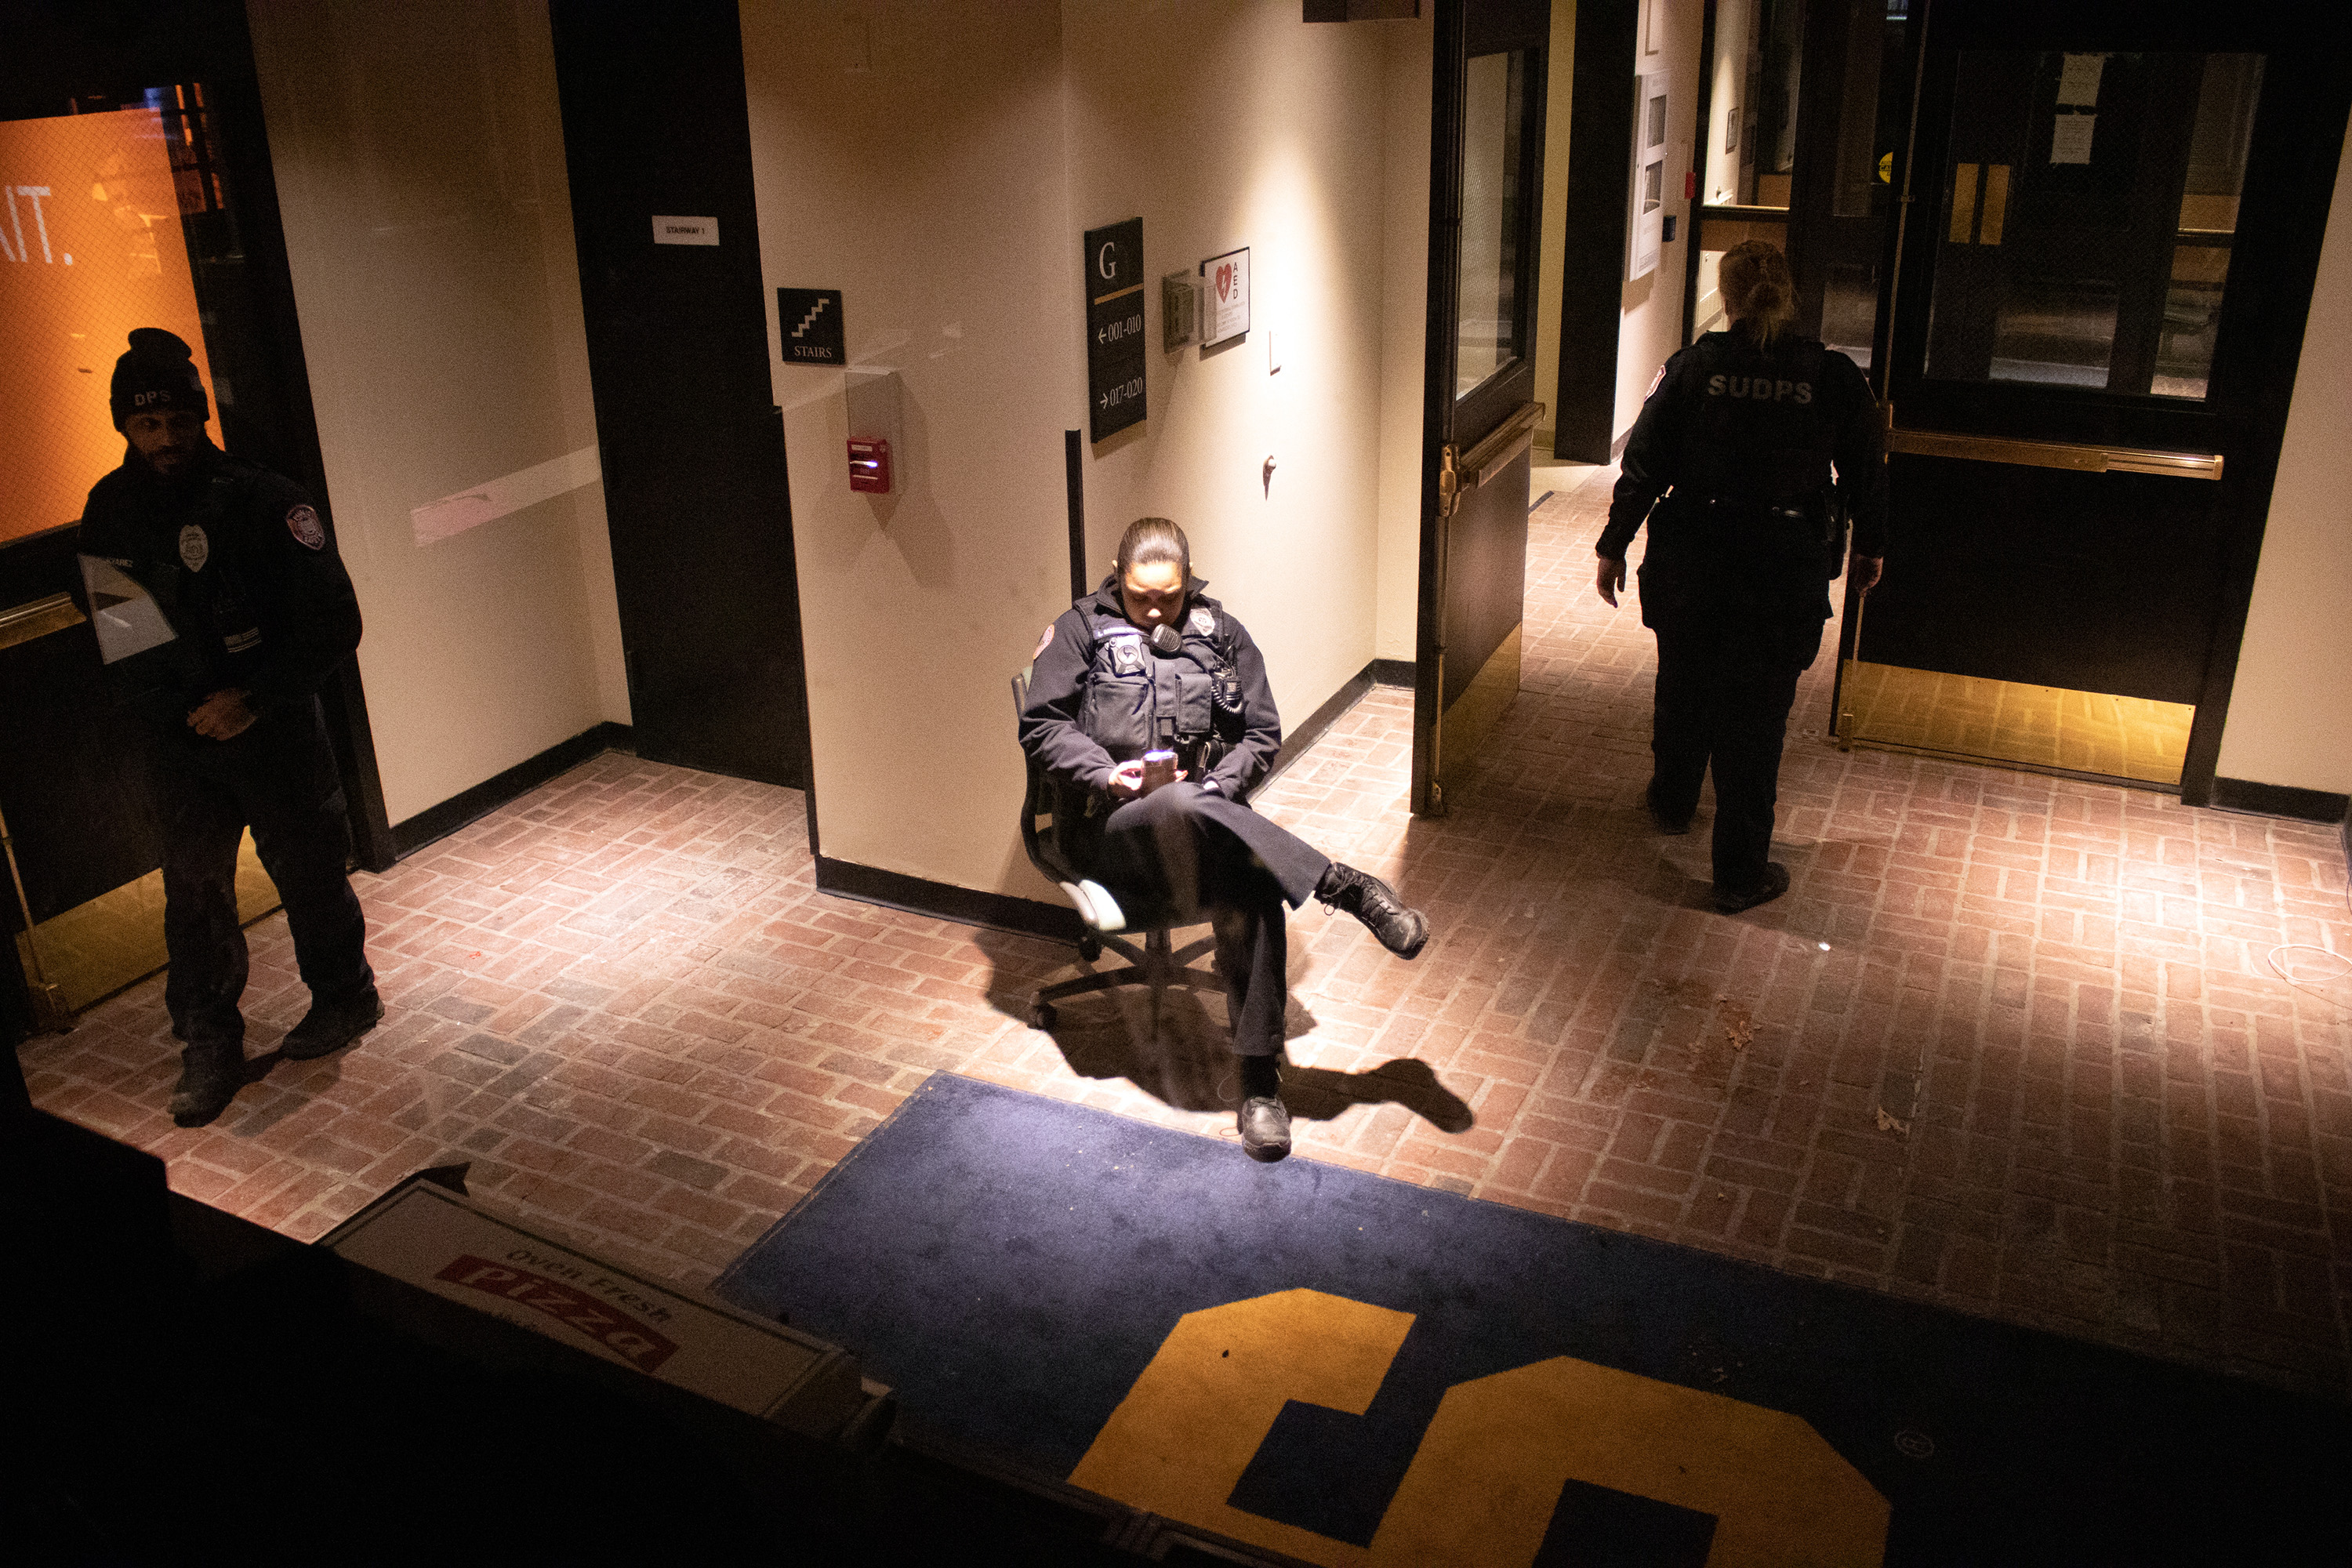 DPS officers guard one of the entrances to Crouse-Hinds Hall on the night of February 18, 2020.